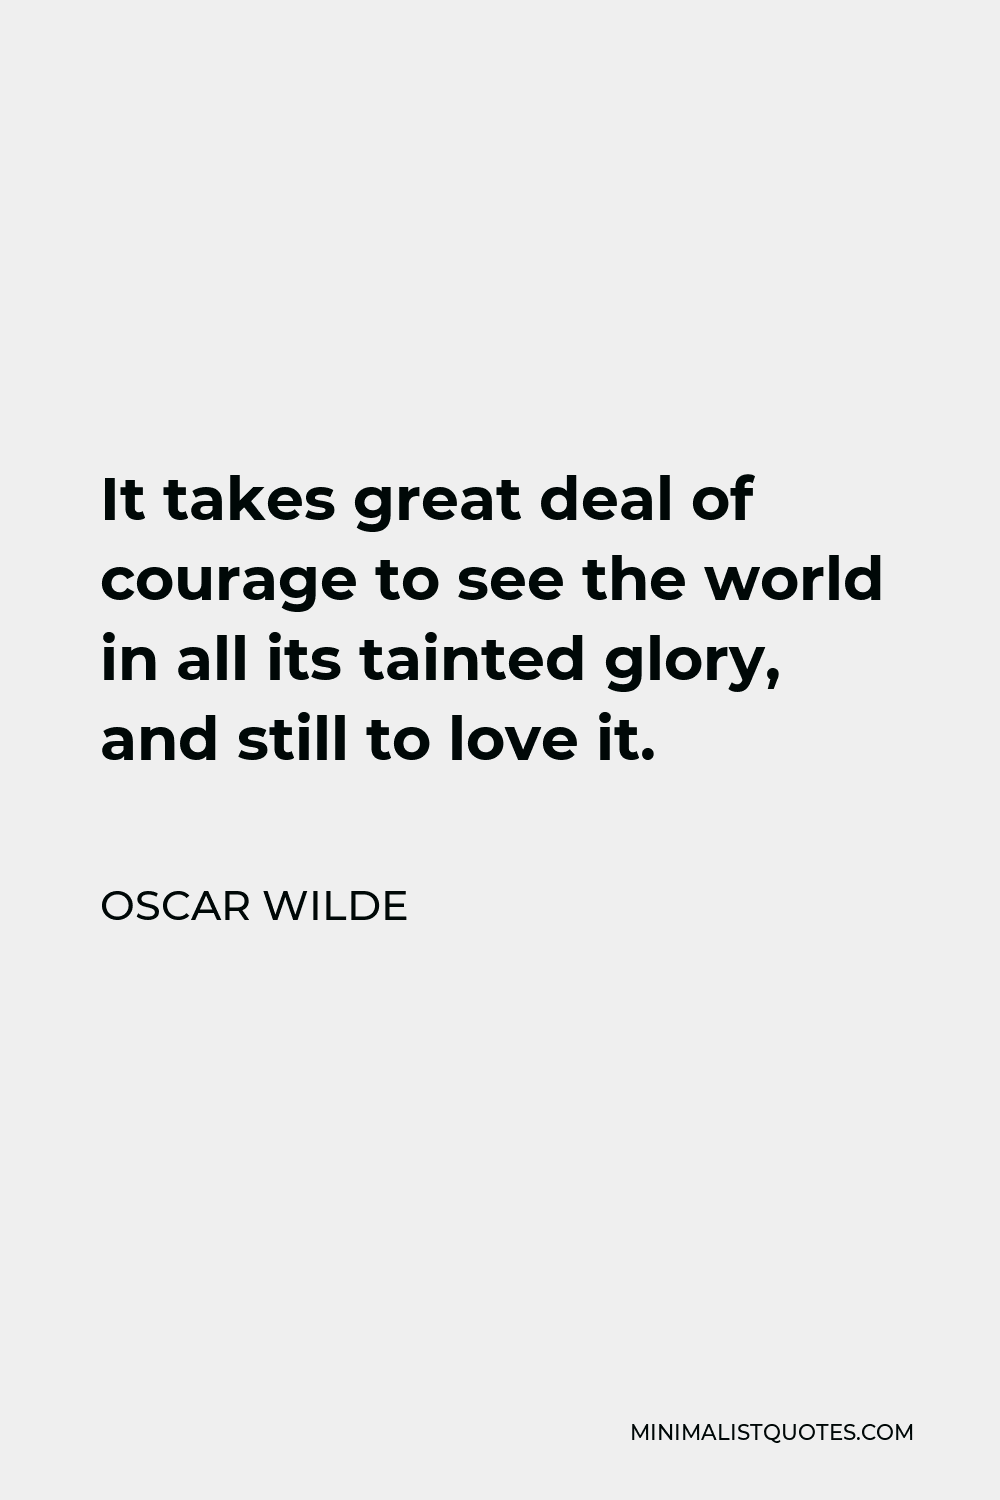 Oscar Wilde Quote - It takes great deal of courage to see the world in all its tainted glory, and still to love it.